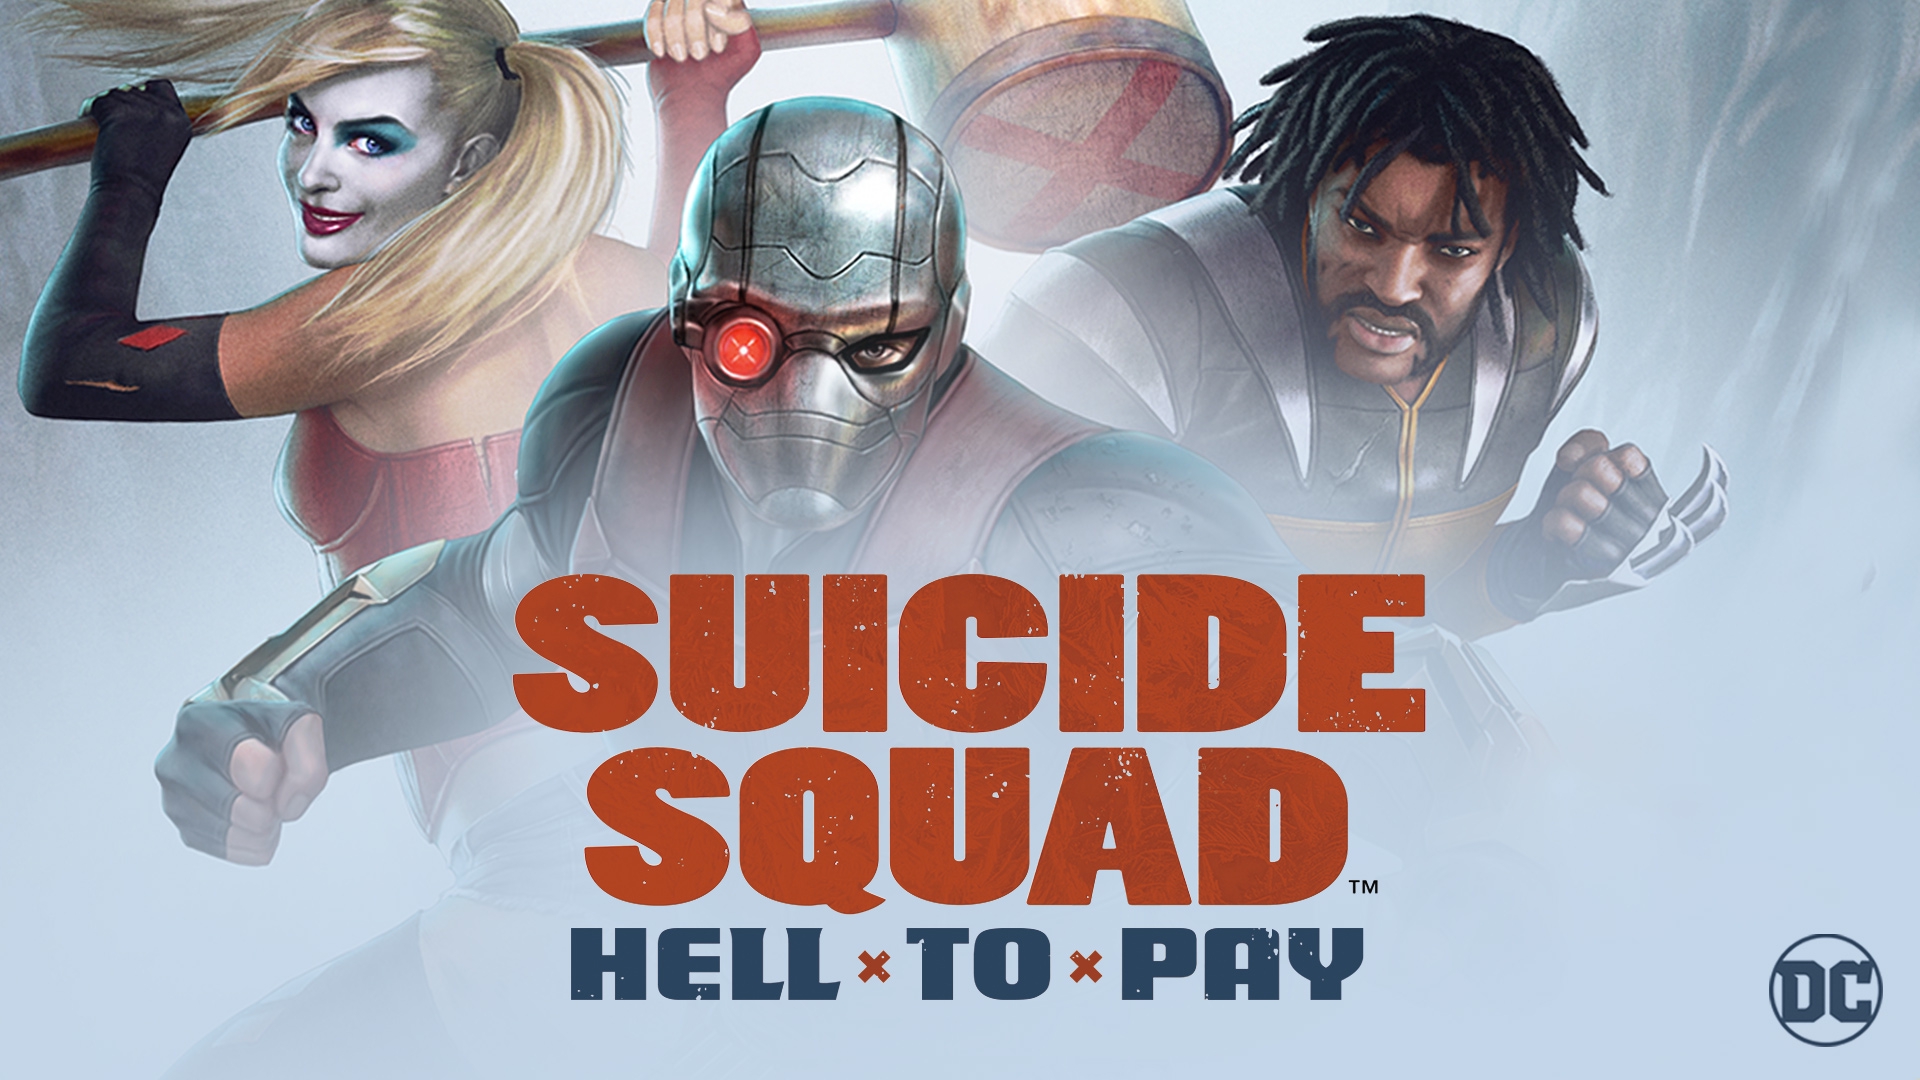 Suicide Squad: Hell to Pay, Movie fanart